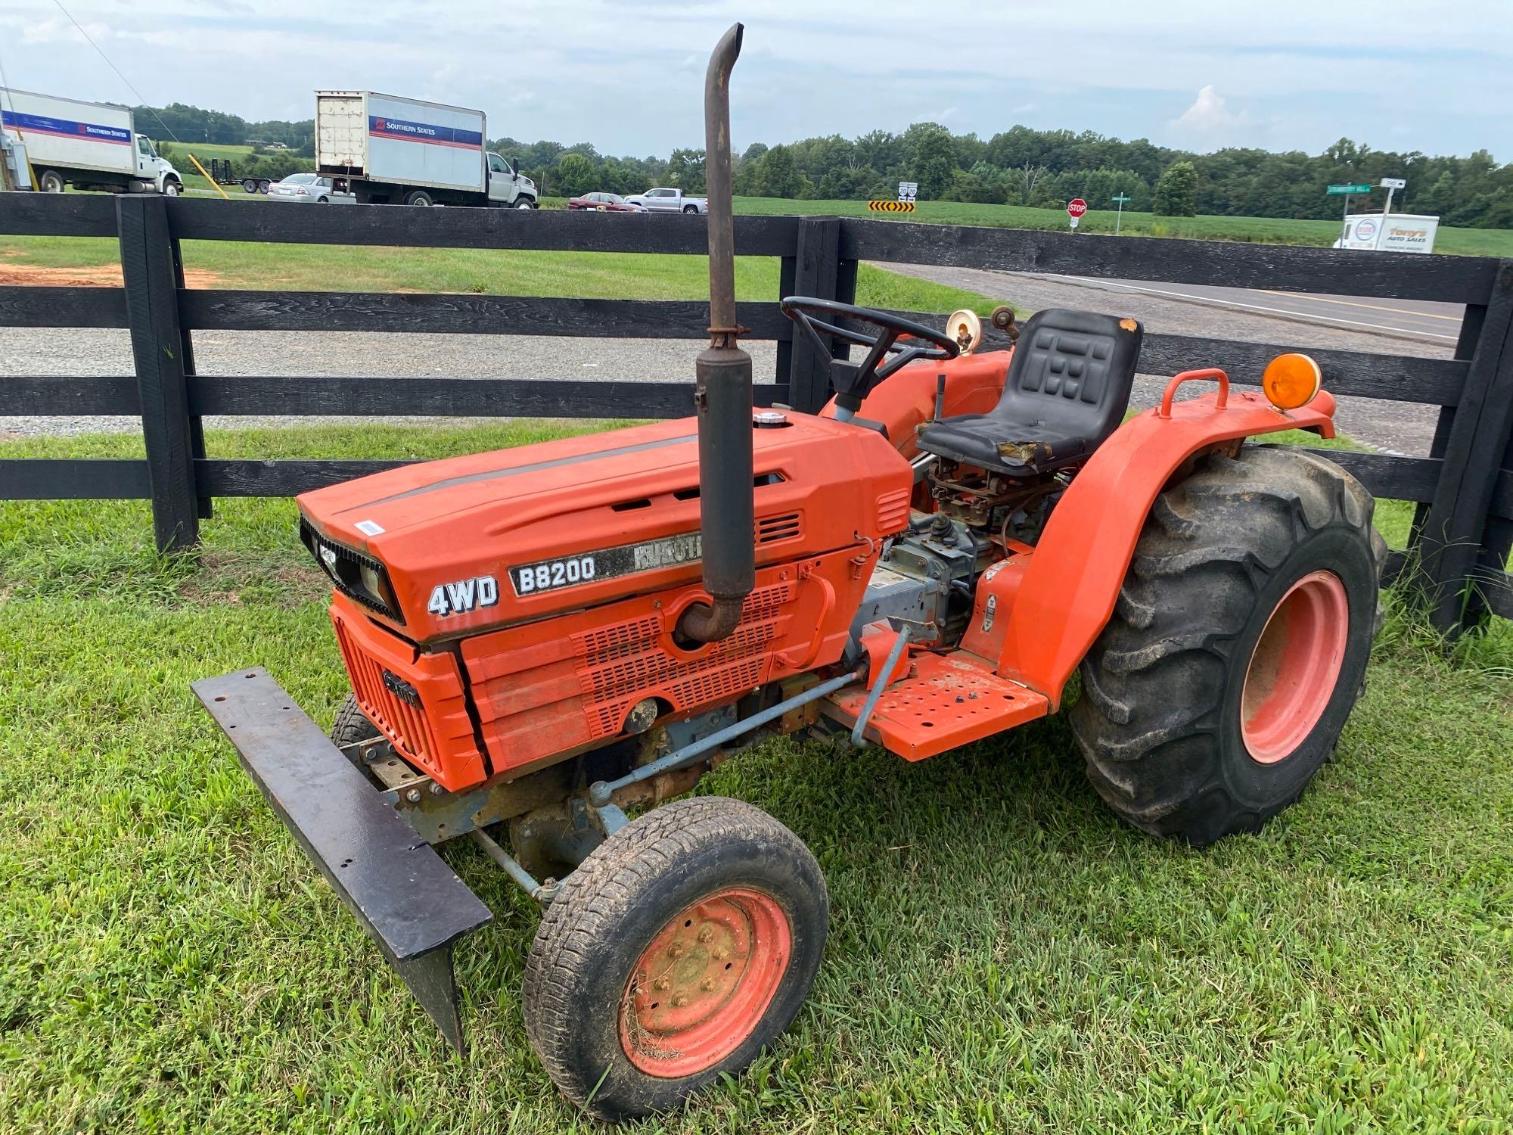 Image for Kubota B820 Tractor 4WD, 210.8 hours showing